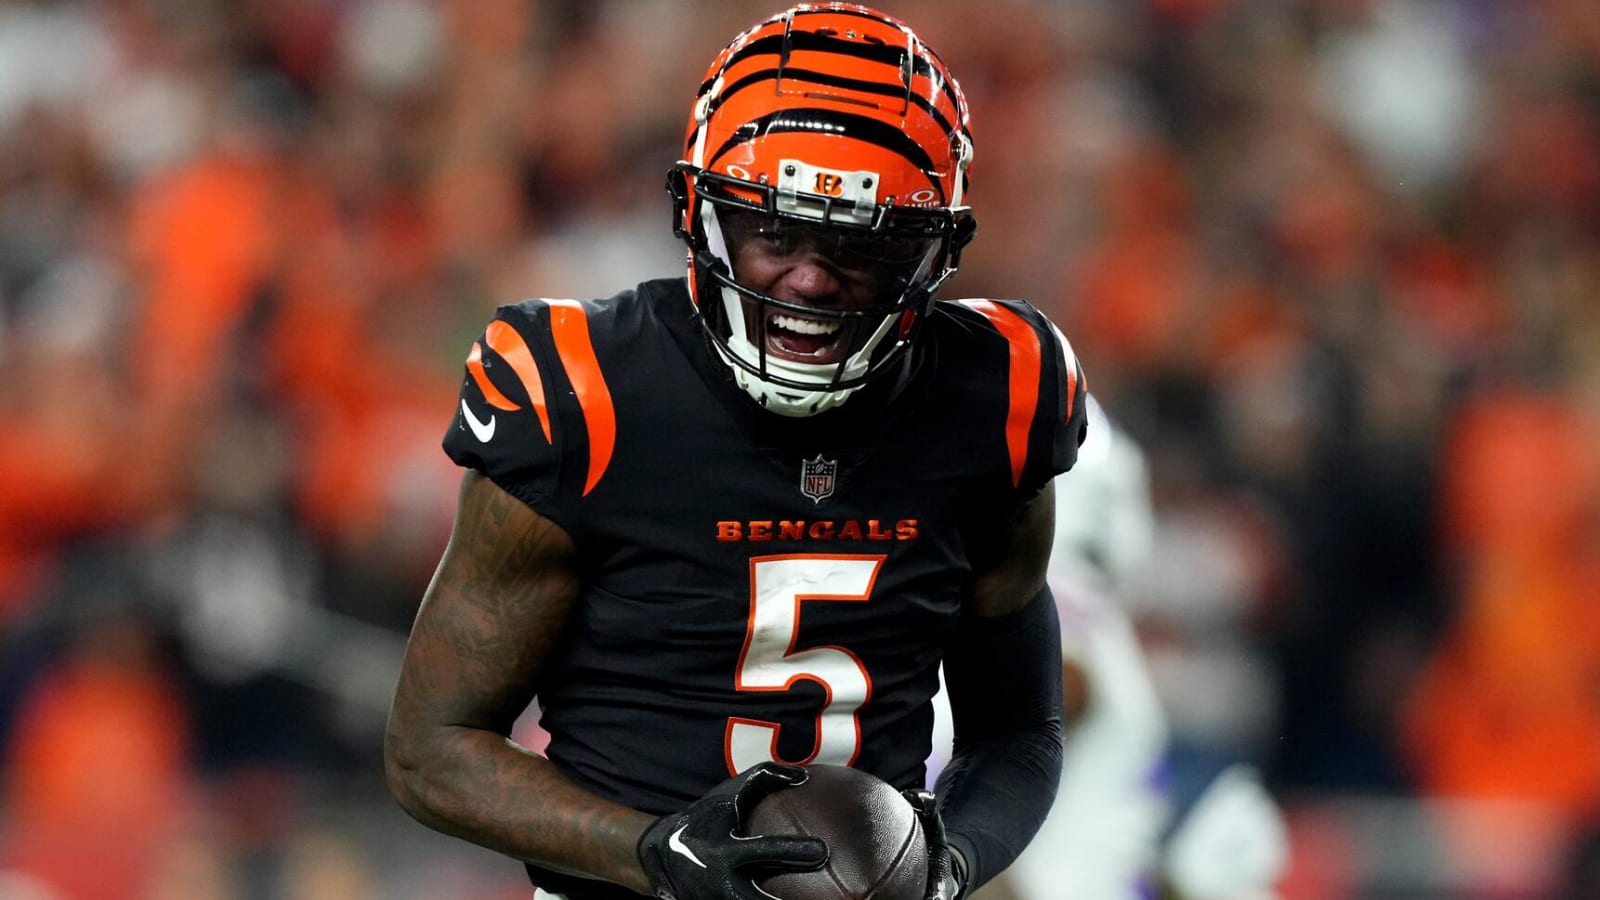 It's now or never for Bengals WR to prove himself in contract year